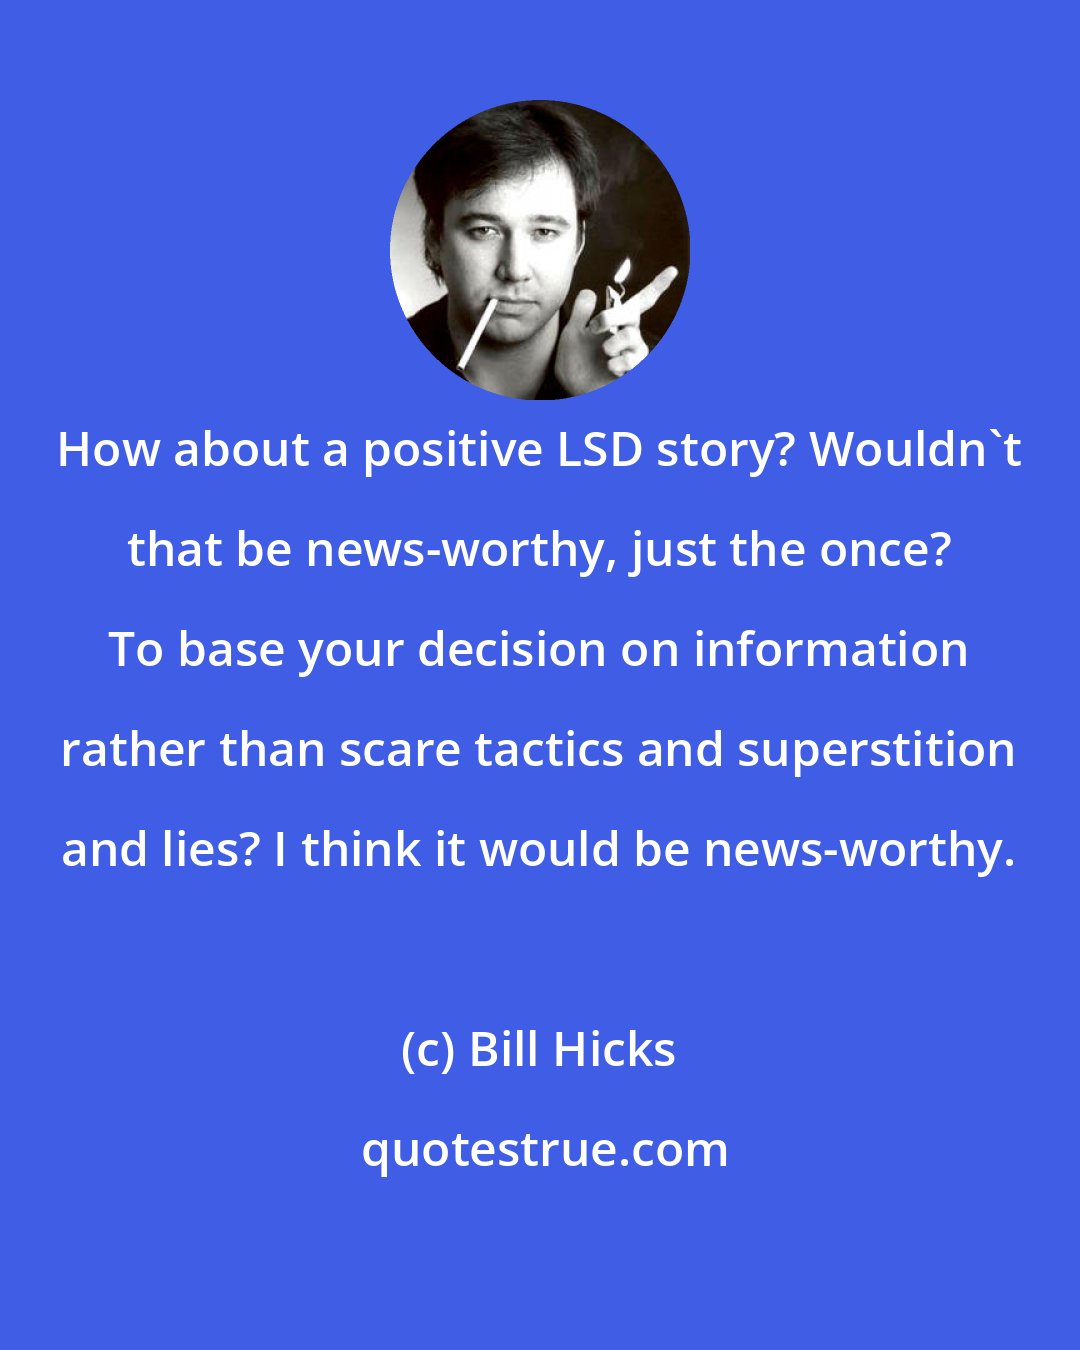 Bill Hicks: How about a positive LSD story? Wouldn't that be news-worthy, just the once? To base your decision on information rather than scare tactics and superstition and lies? I think it would be news-worthy.